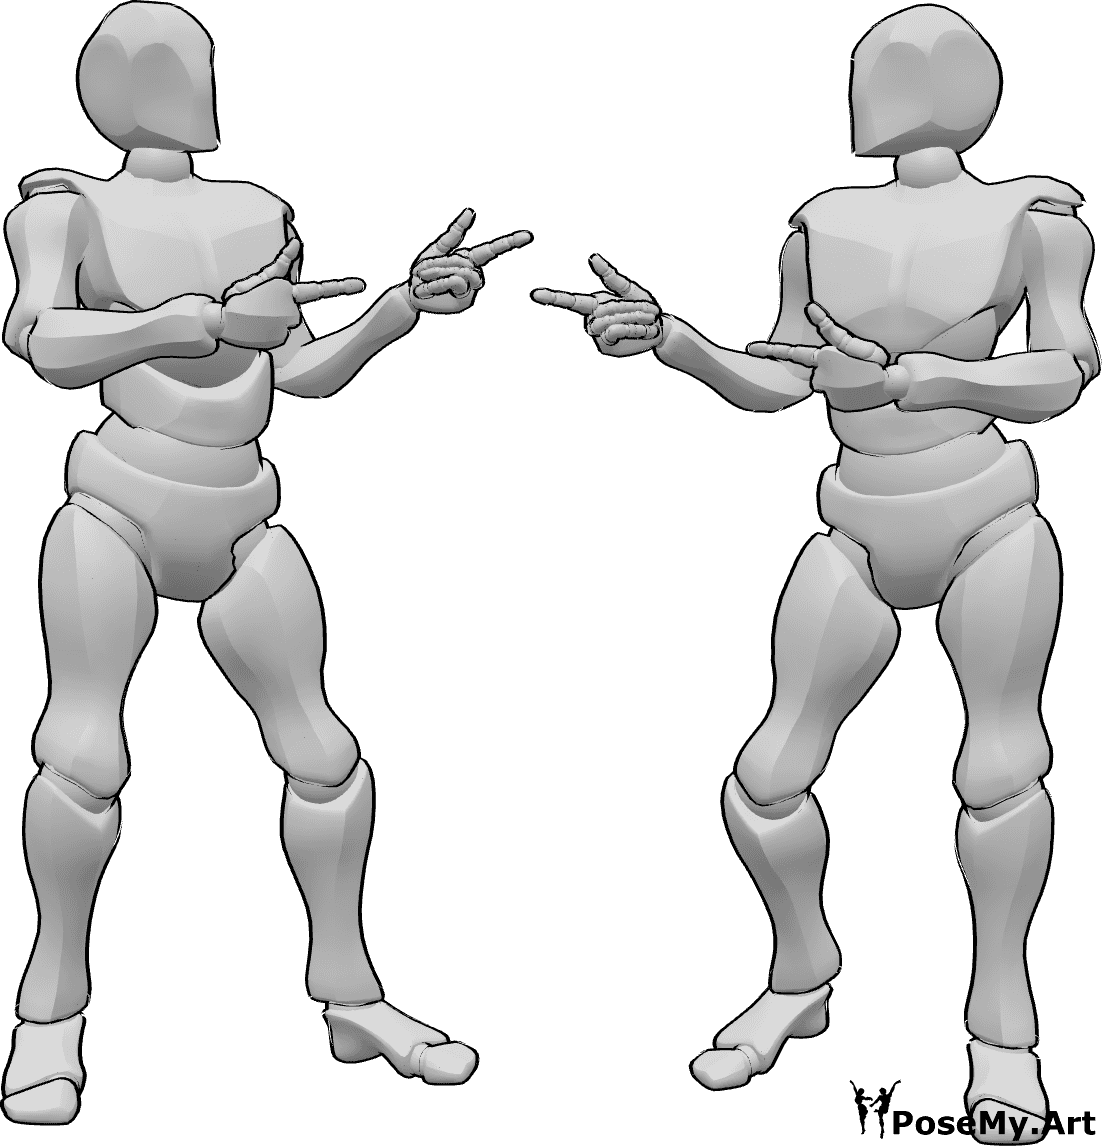 Pose Reference - Two males pointing pose - Two males are happily pointing at each other, saying 